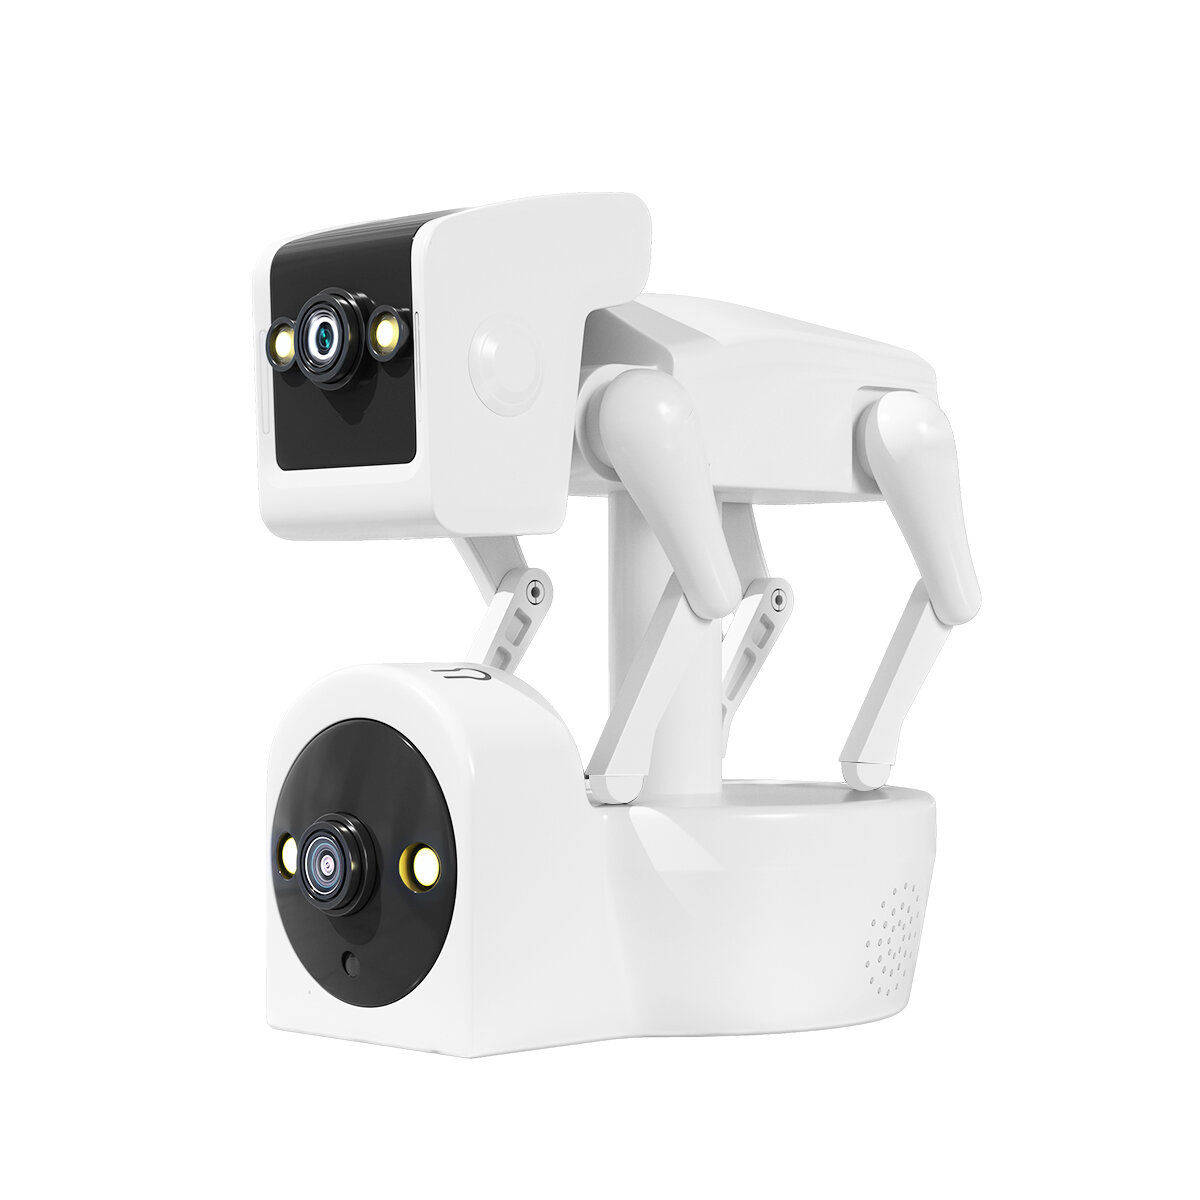 

ESCAM PT212 Dog Robot 4MP HD WiFi Camera H.265 Color Night Vision Motion Detection Two Way Audio PTZ IP Camera for Home